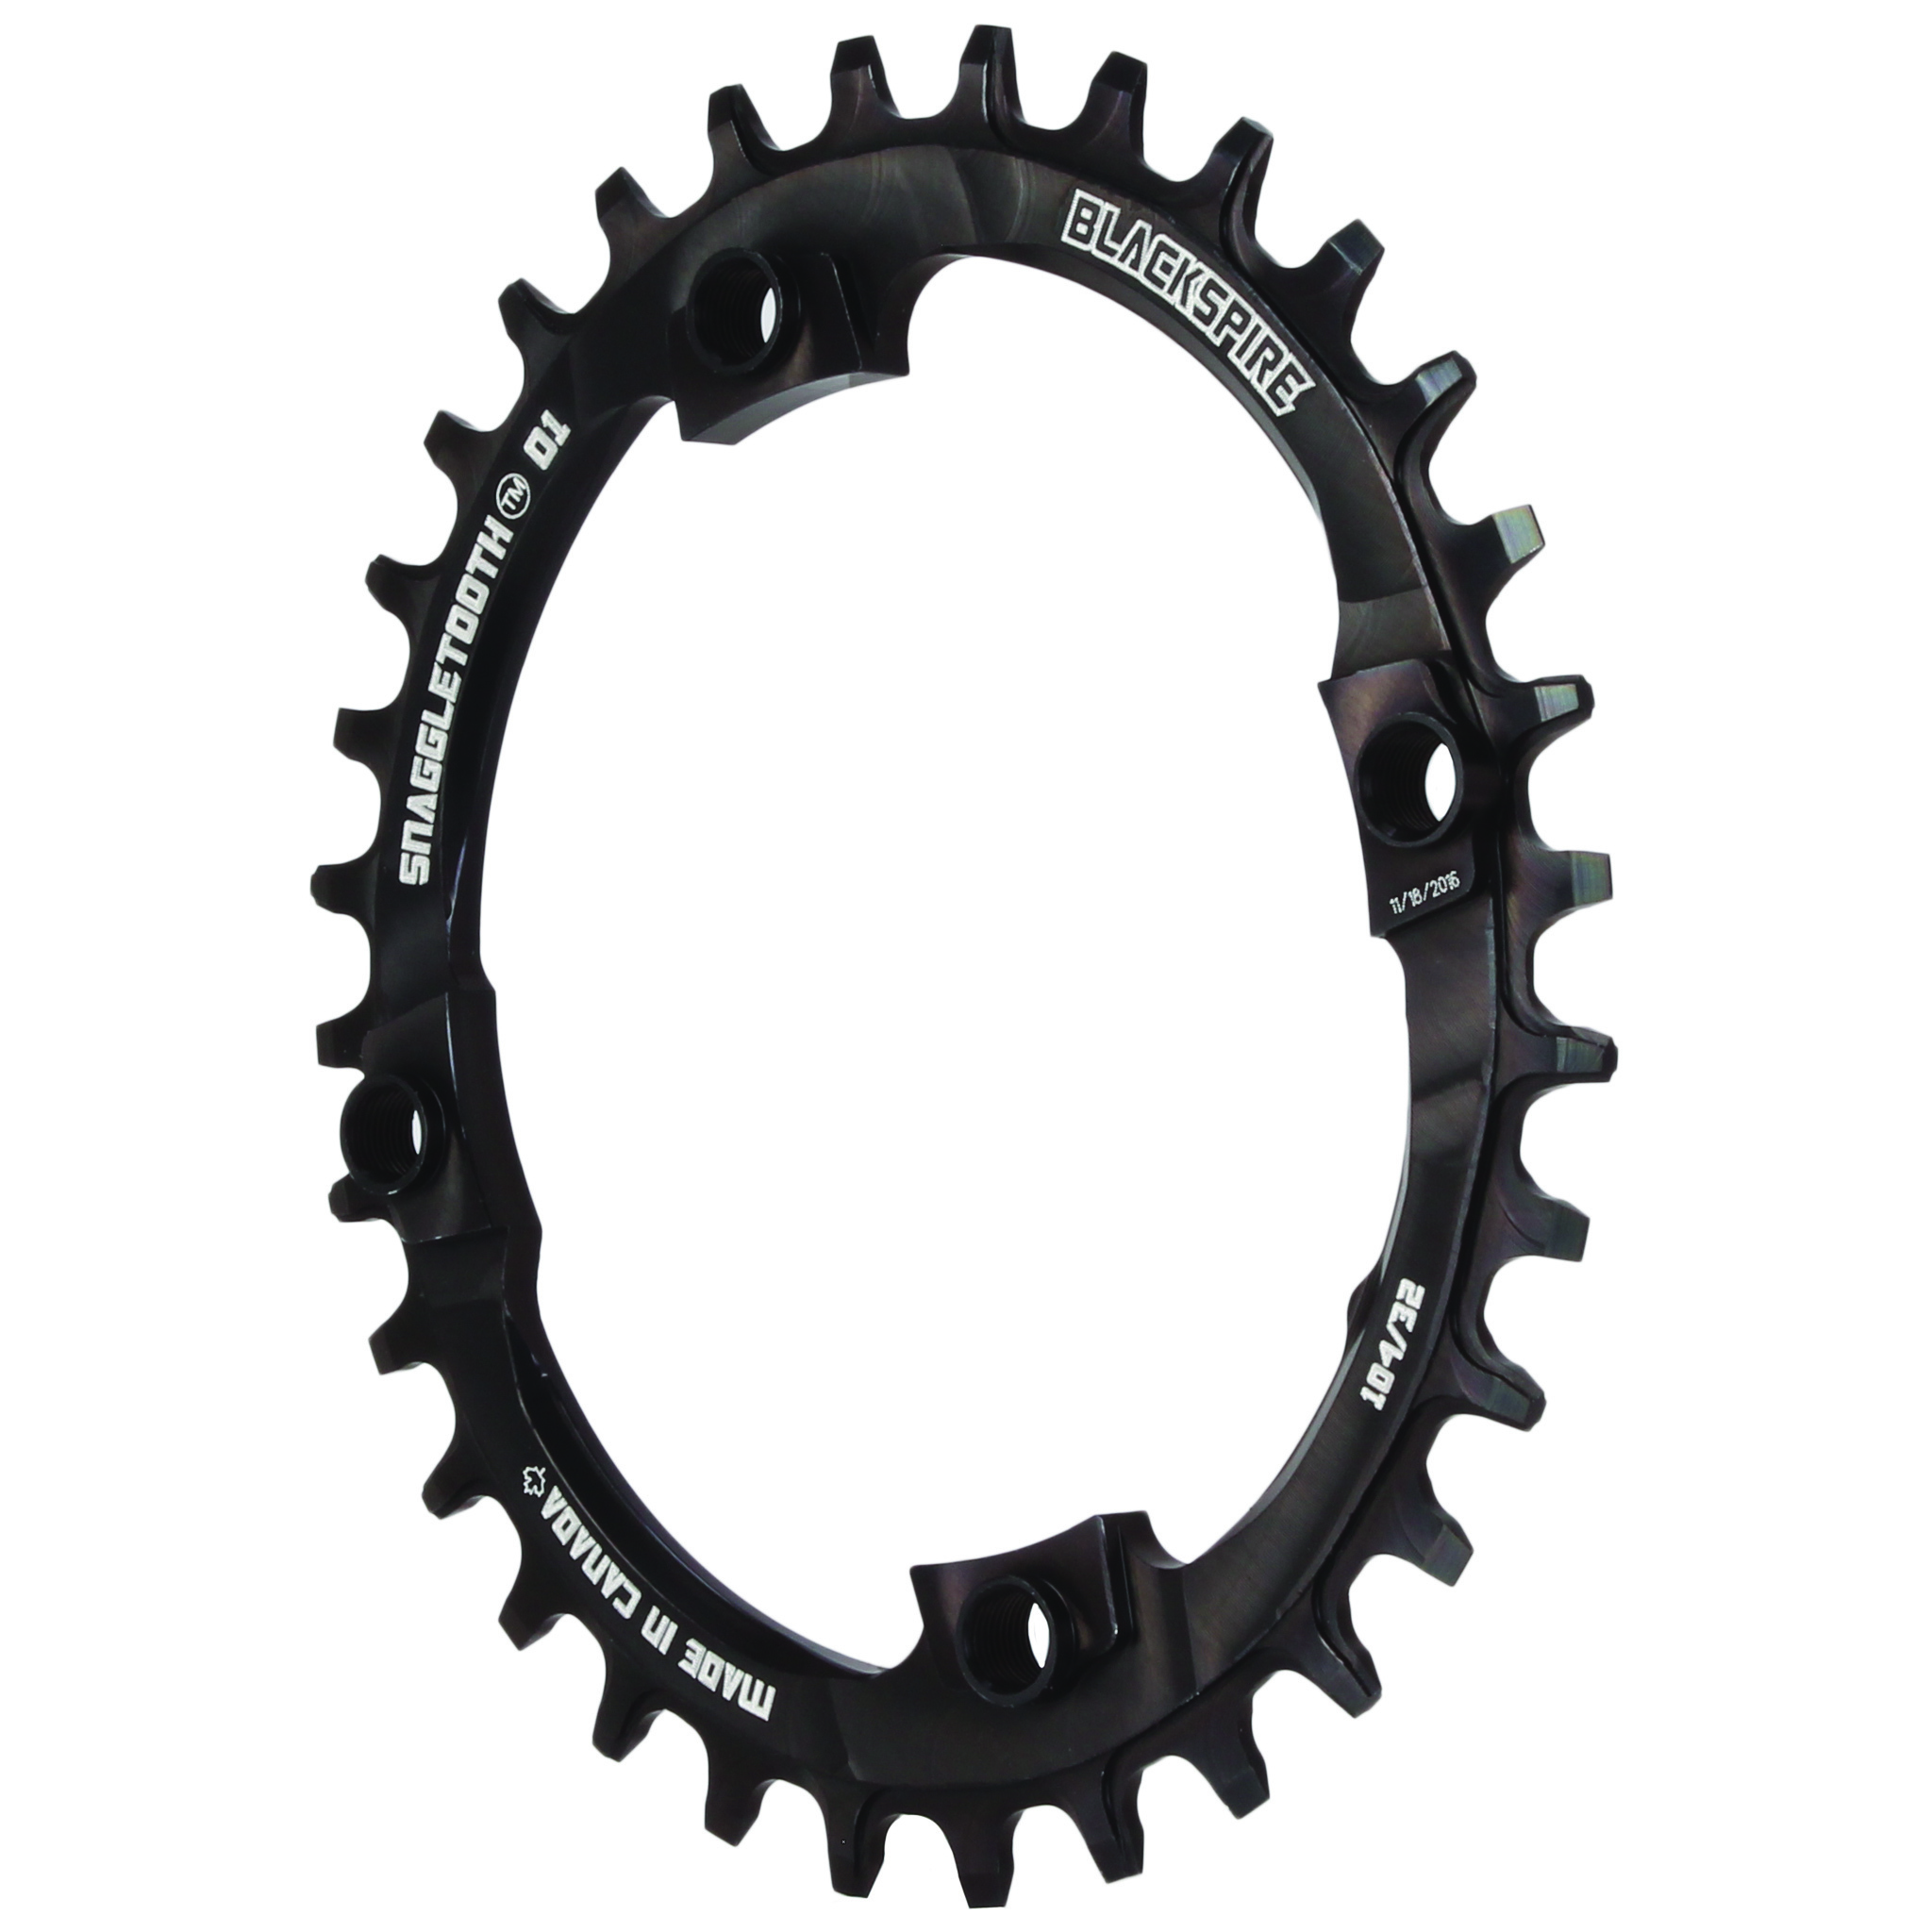 Blackspire Snaggletooth 104BCD Oval chainring 32T - black - Picture 1 of 1